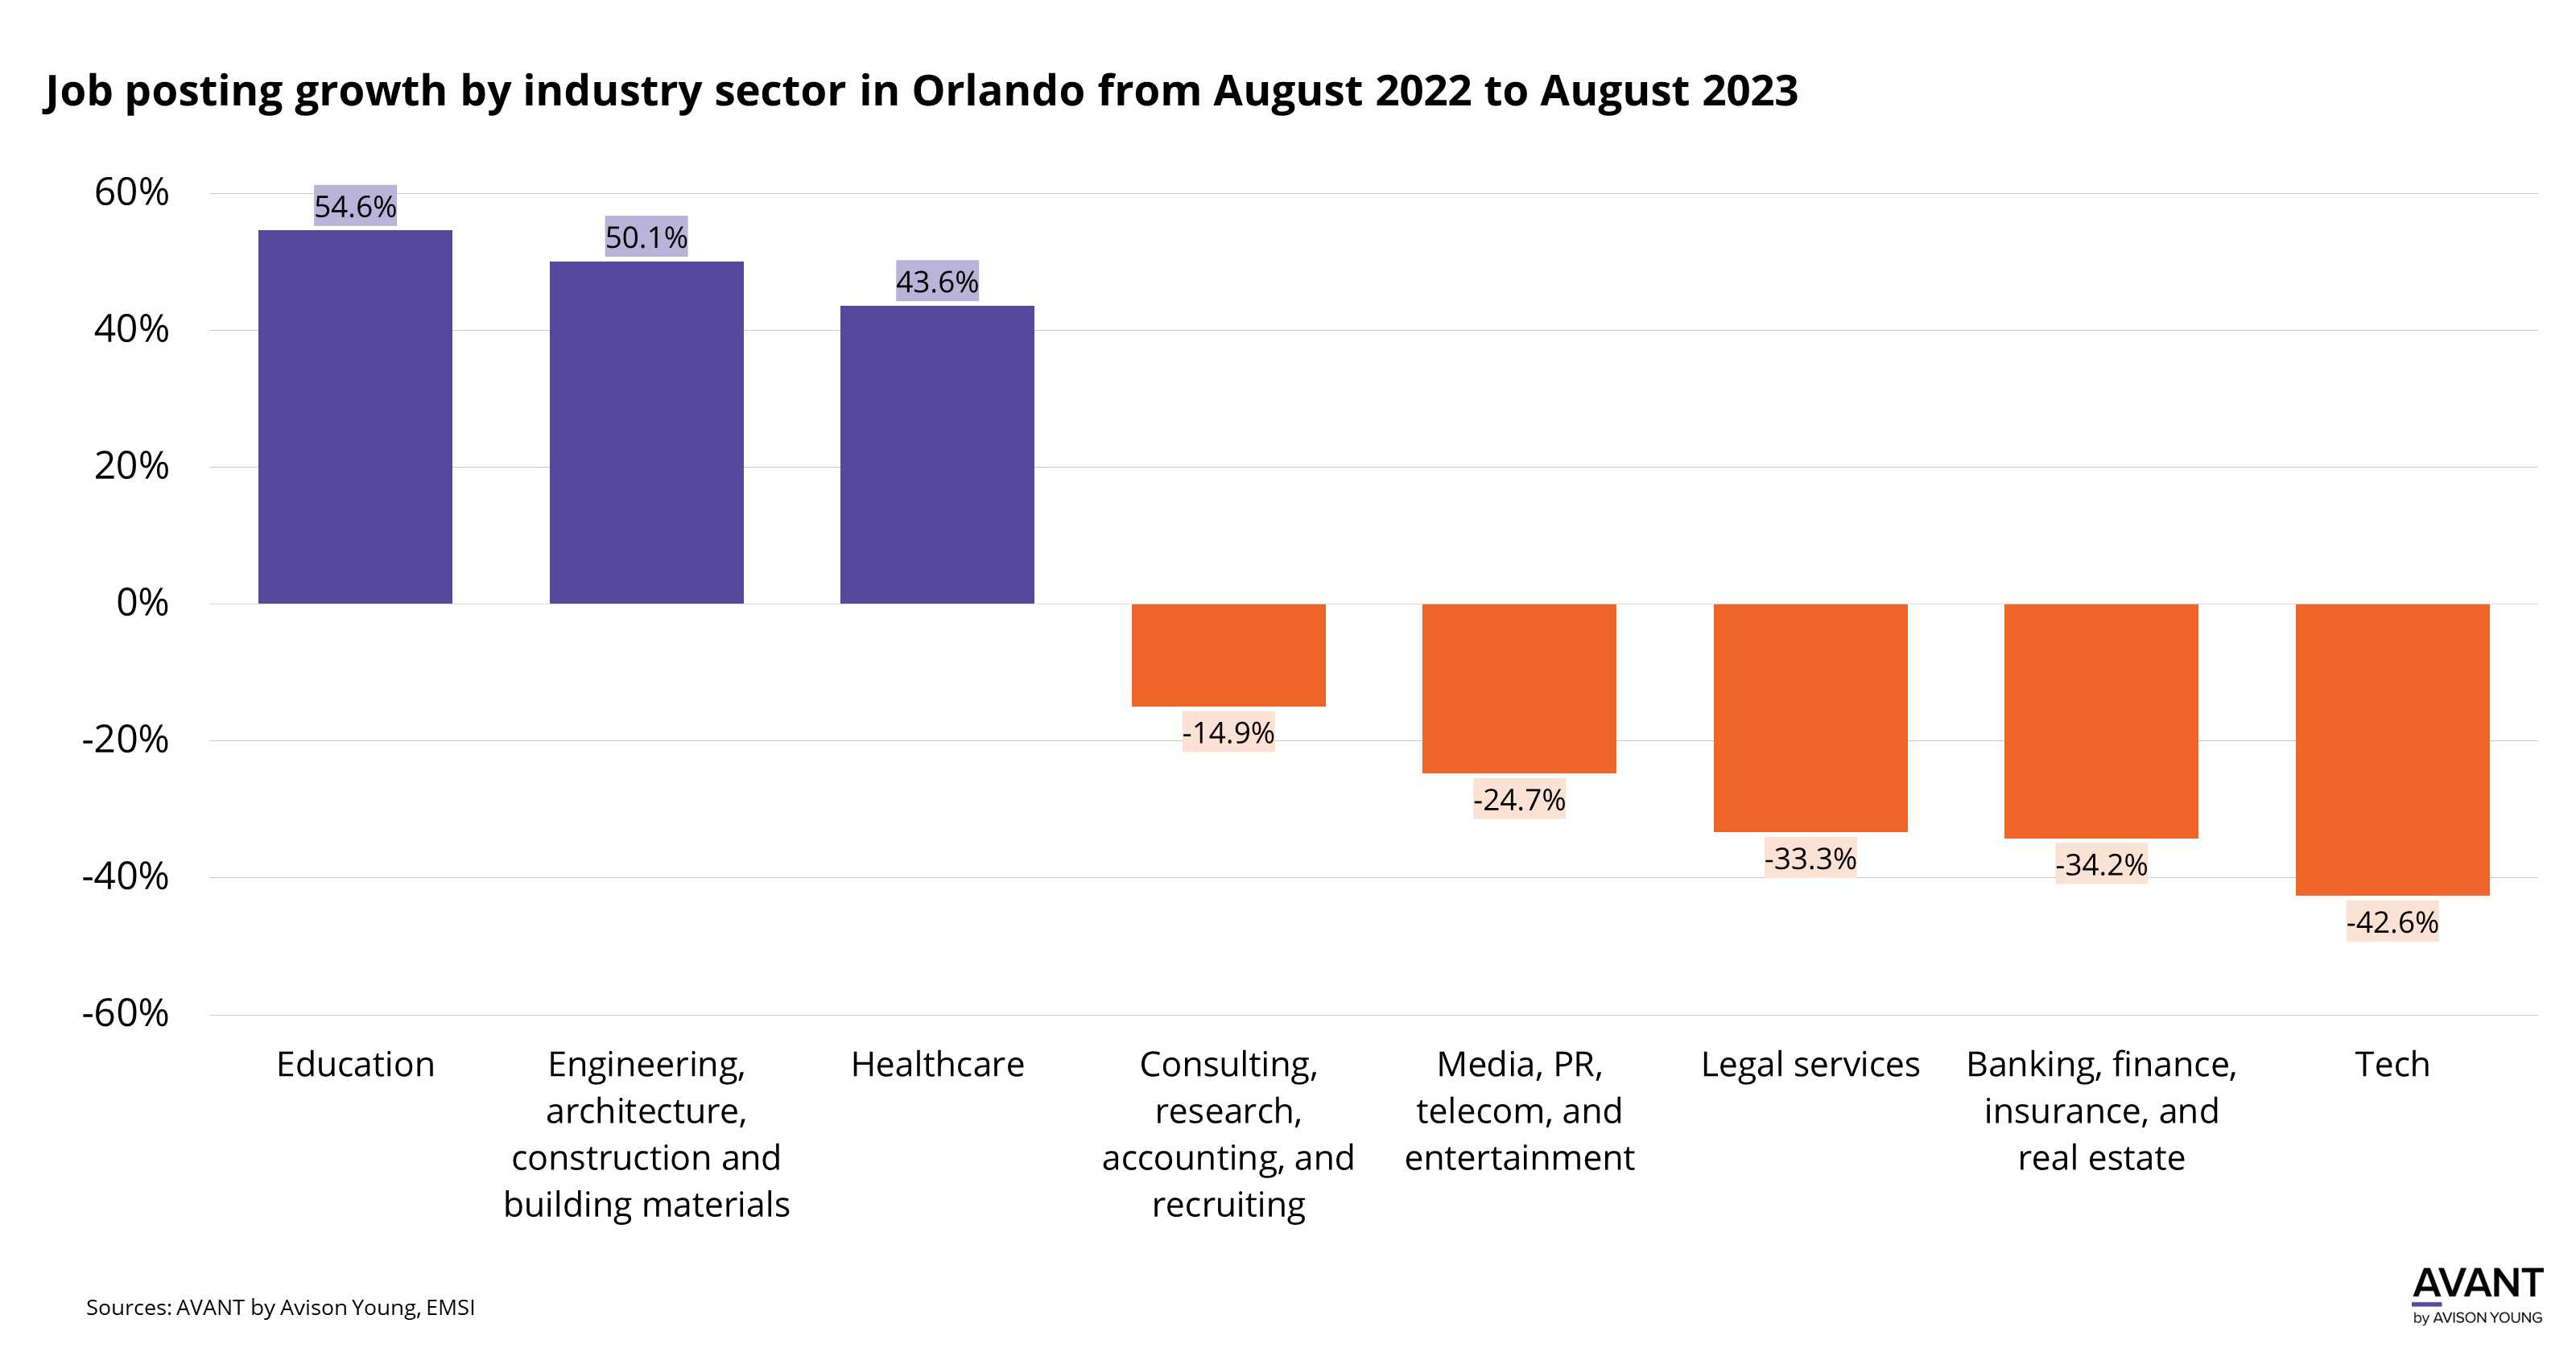 Orlando’s job posting growth experiences significant disparities across different industry sectors